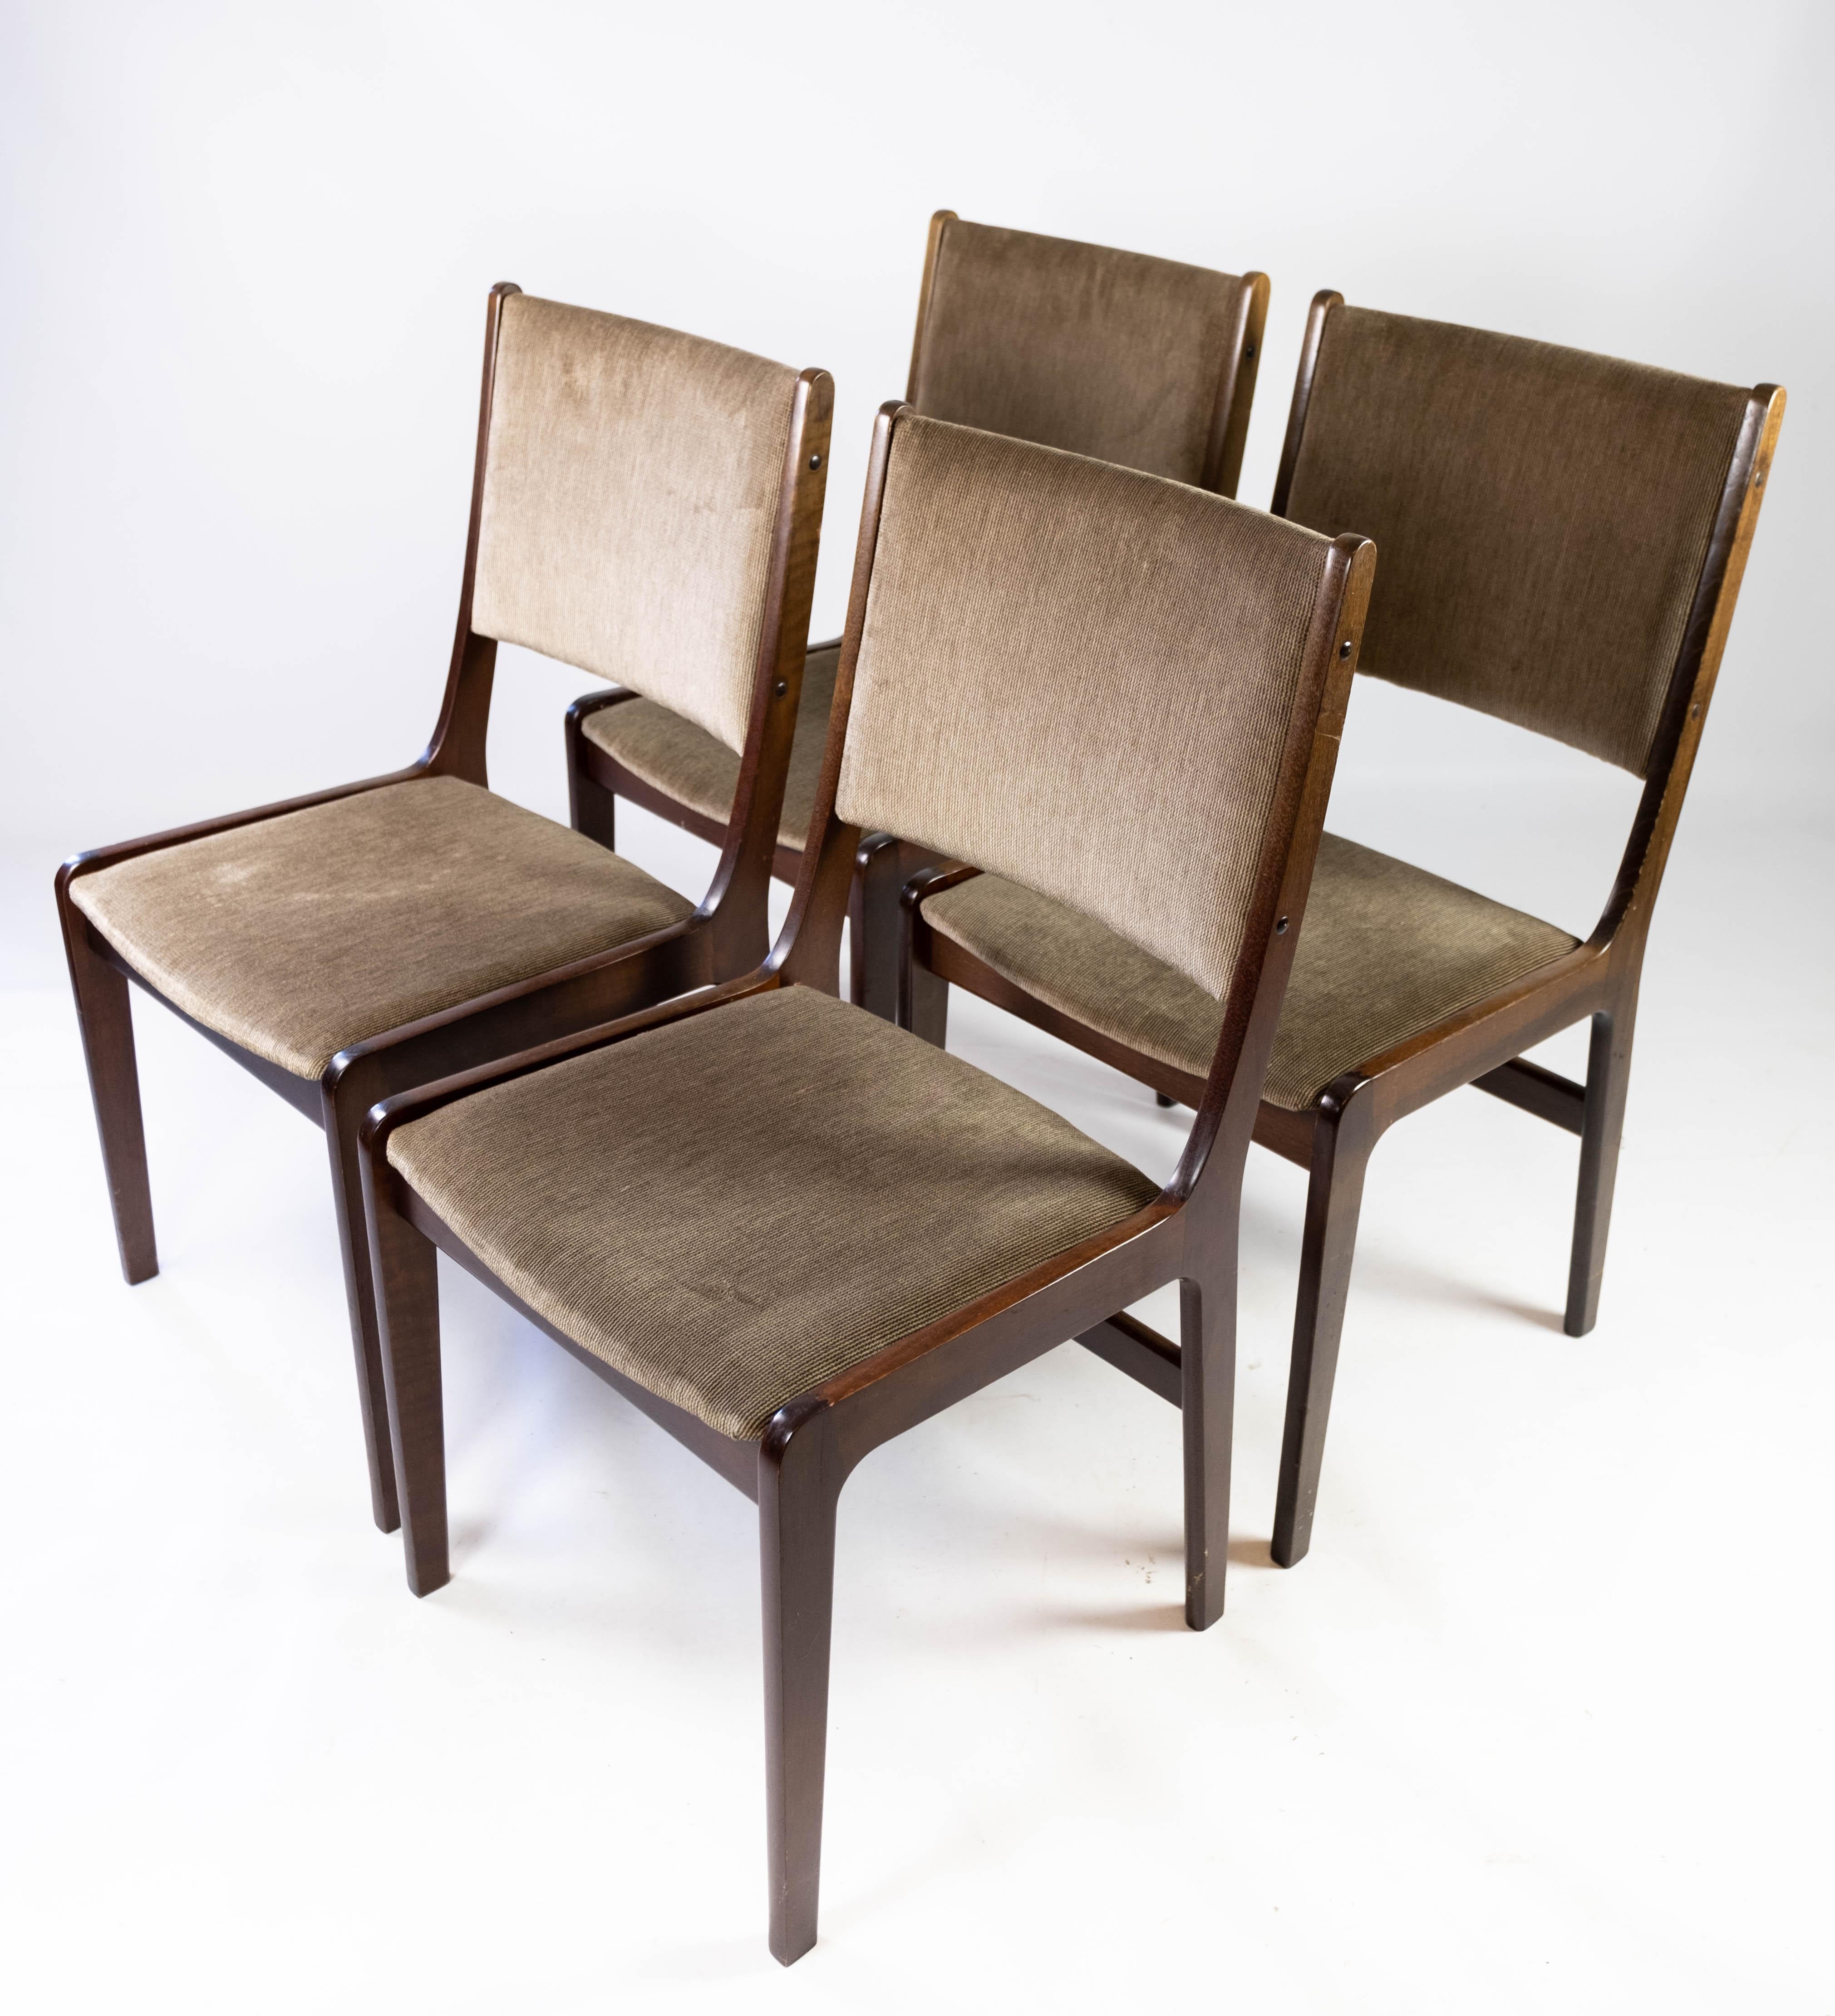 Scandinavian Modern Set of Four Dining Room Chairs in Dark Wood of Danish Design by Faarstrup, 1960s For Sale